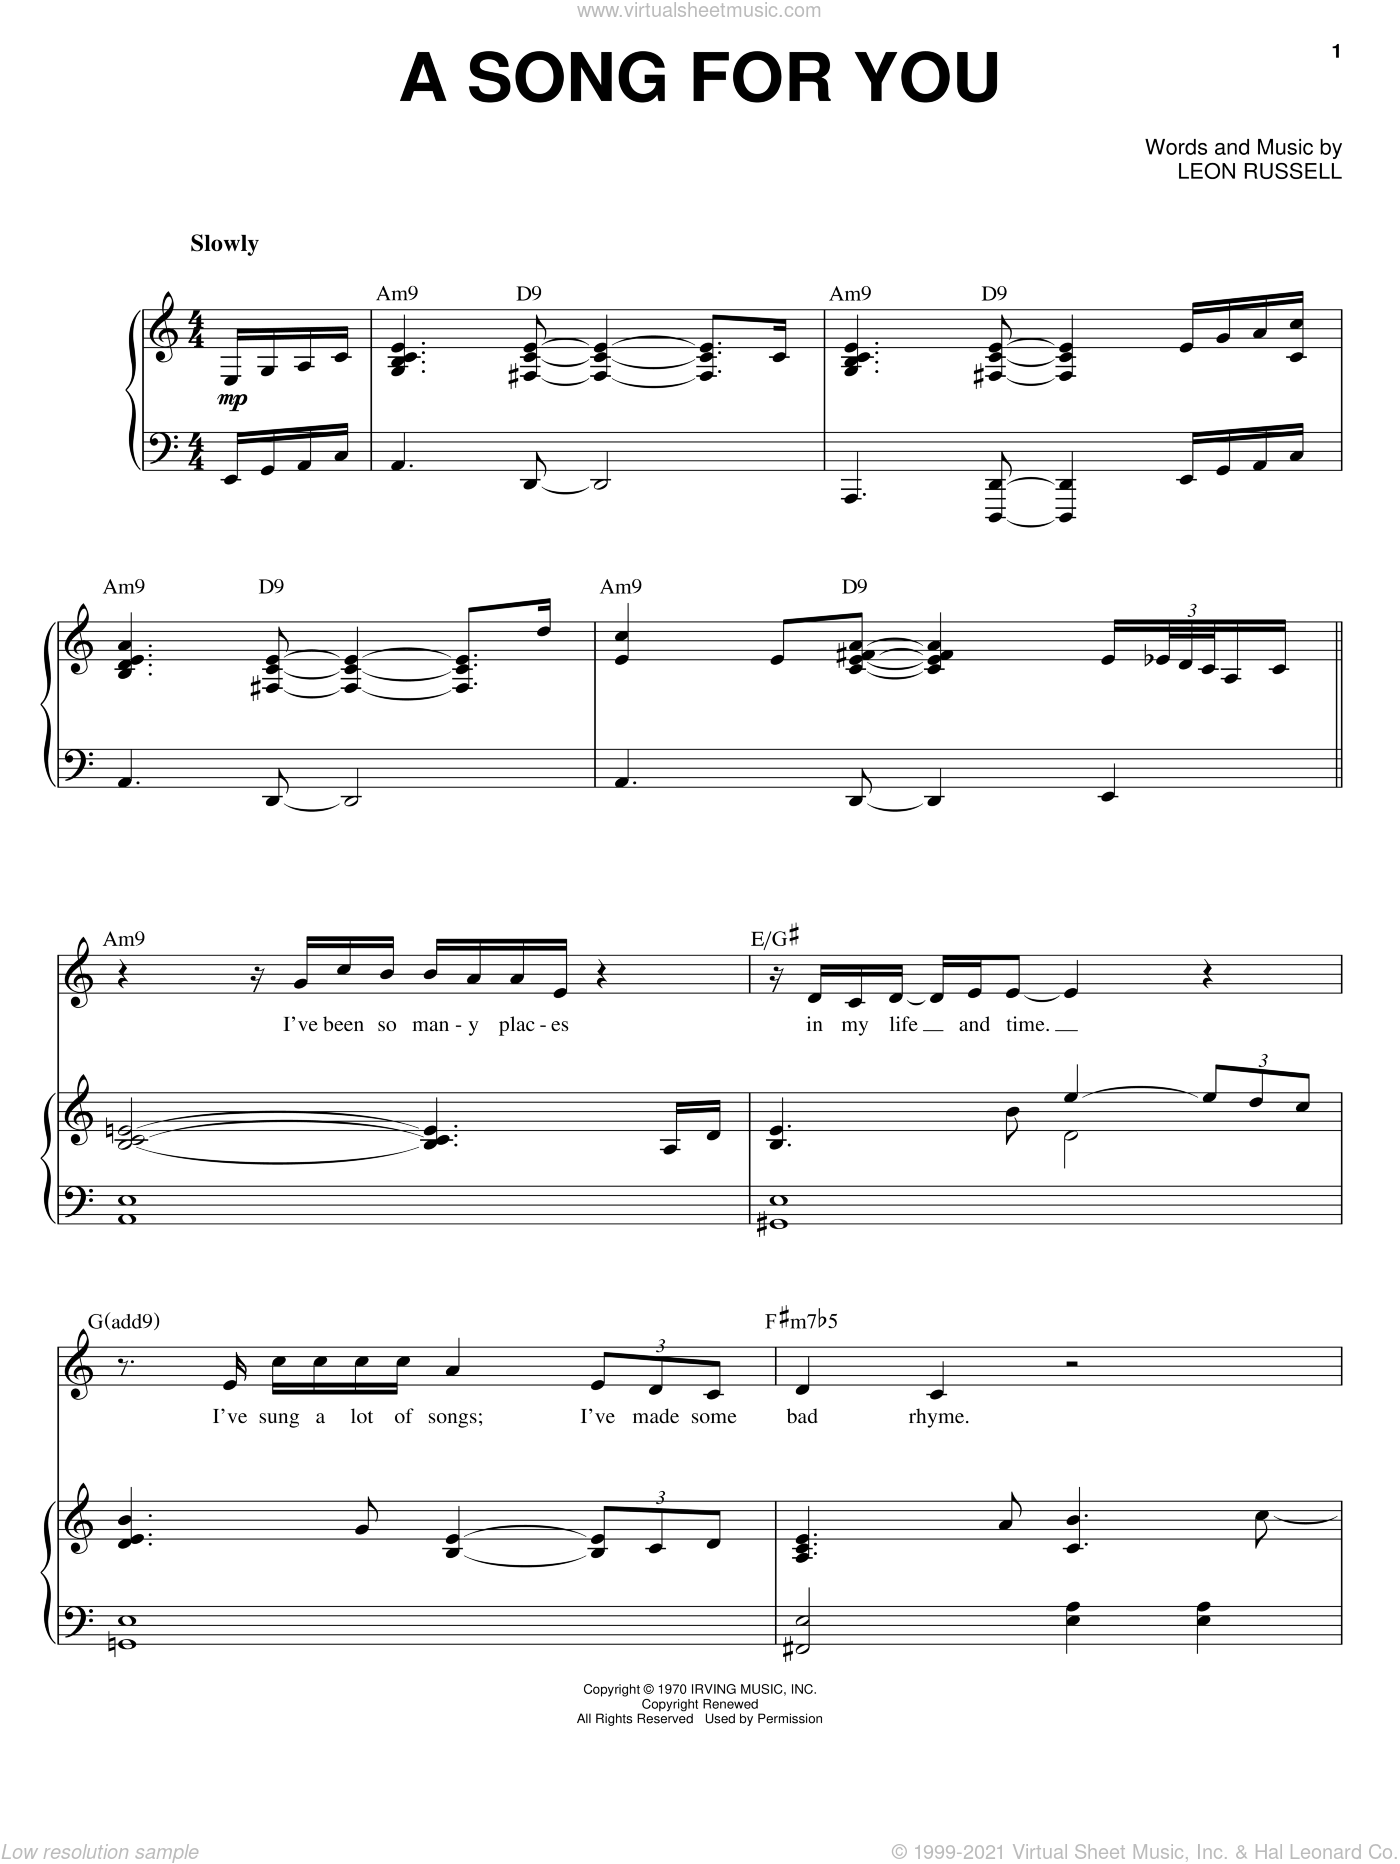 Buble - A Song For You sheet music for voice and piano PDF